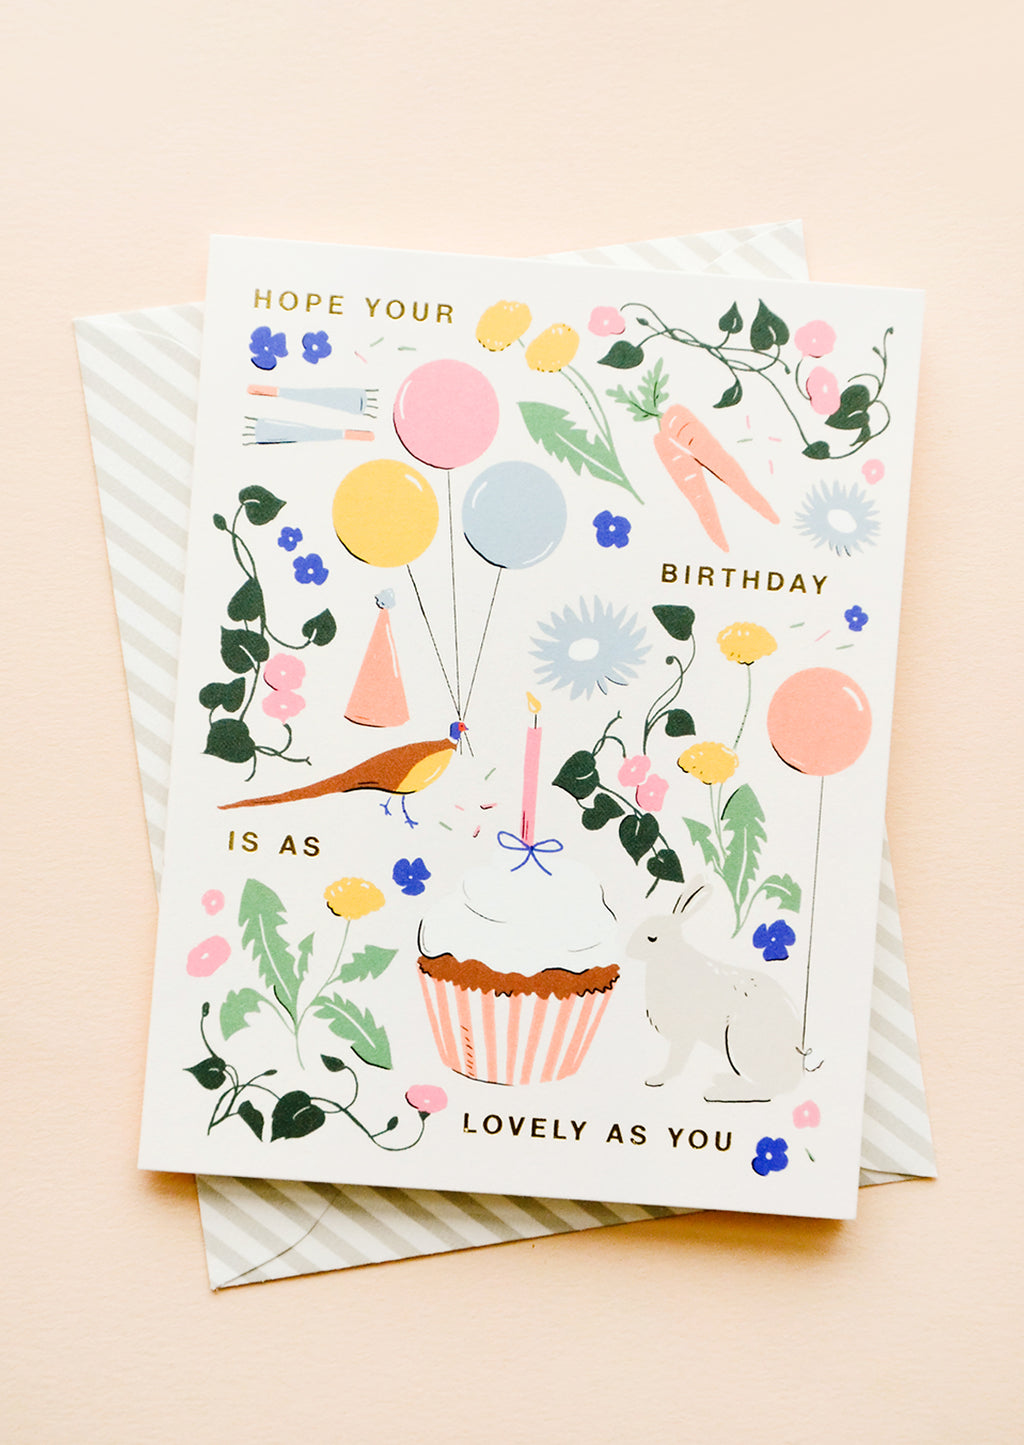 2: Whimsically illustrated greeting card with garden-centric scene and golden lettering reading "Hope your birthday is as lovely as you"